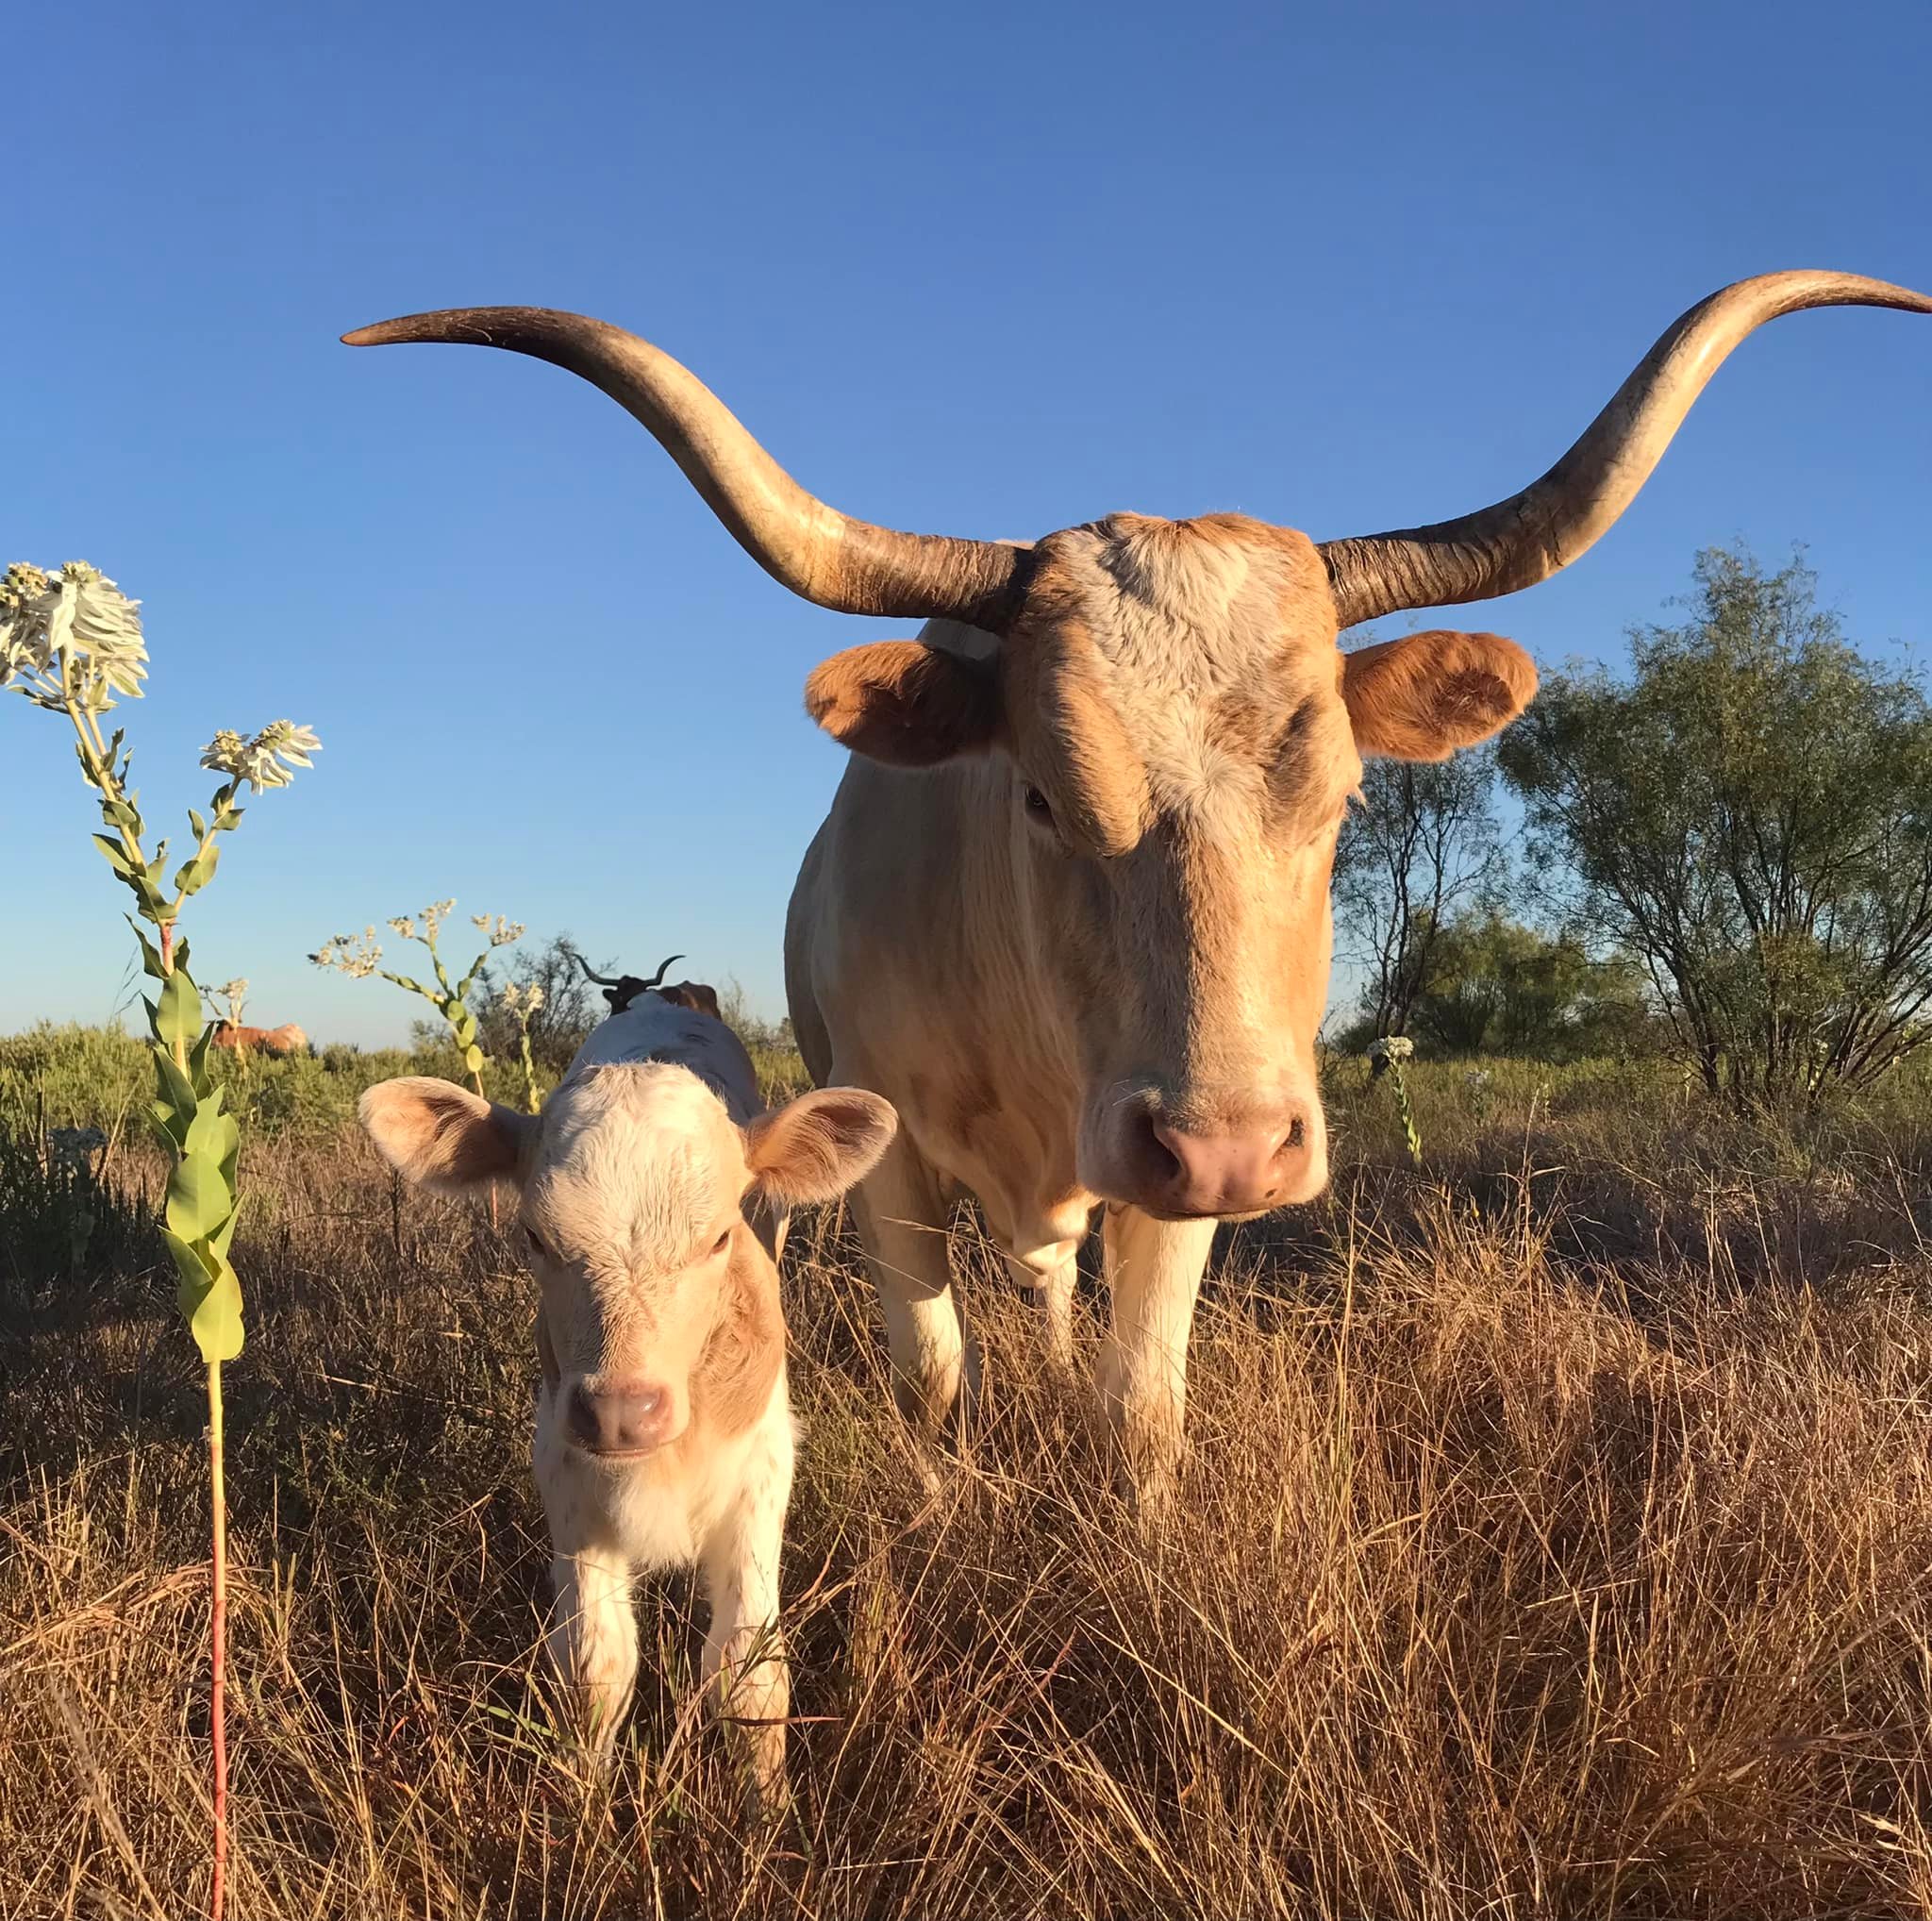 Looking at the camera, a Texas Longhorn stands in a dry, brushy field with a calf by it side. Blue sky and trees in the background.